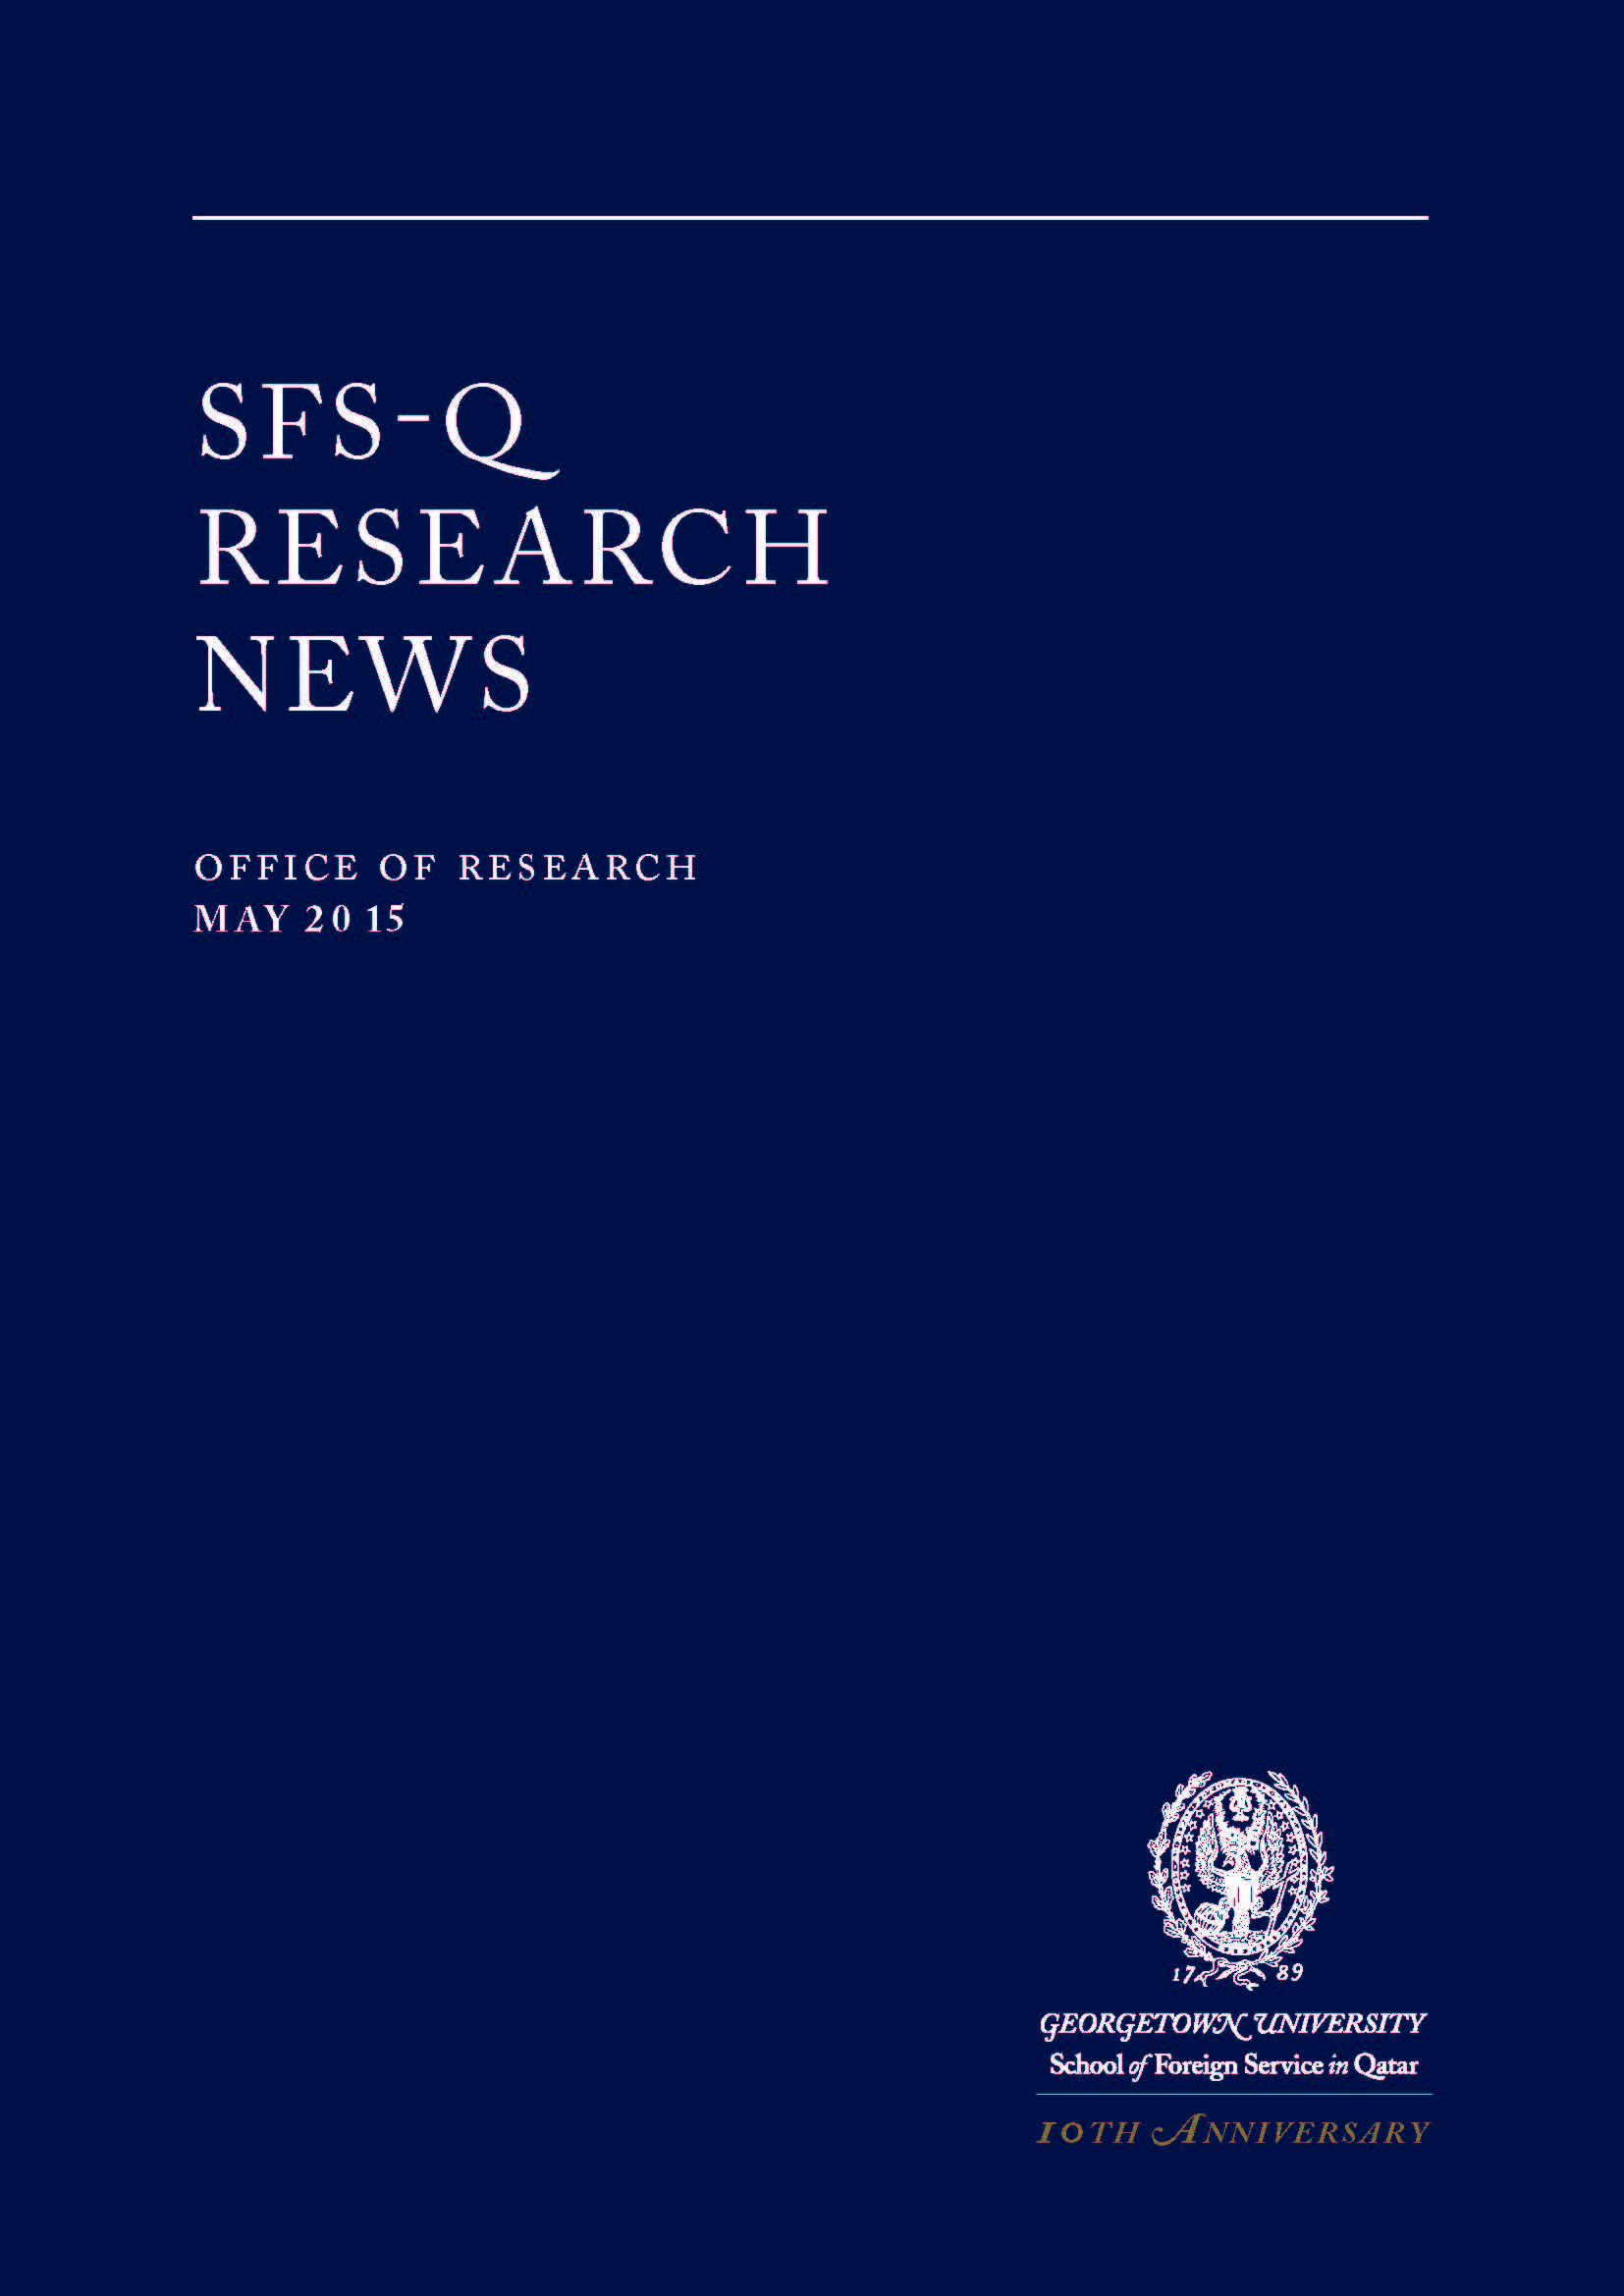 SFS-Q Research News Report May 2015 Cover